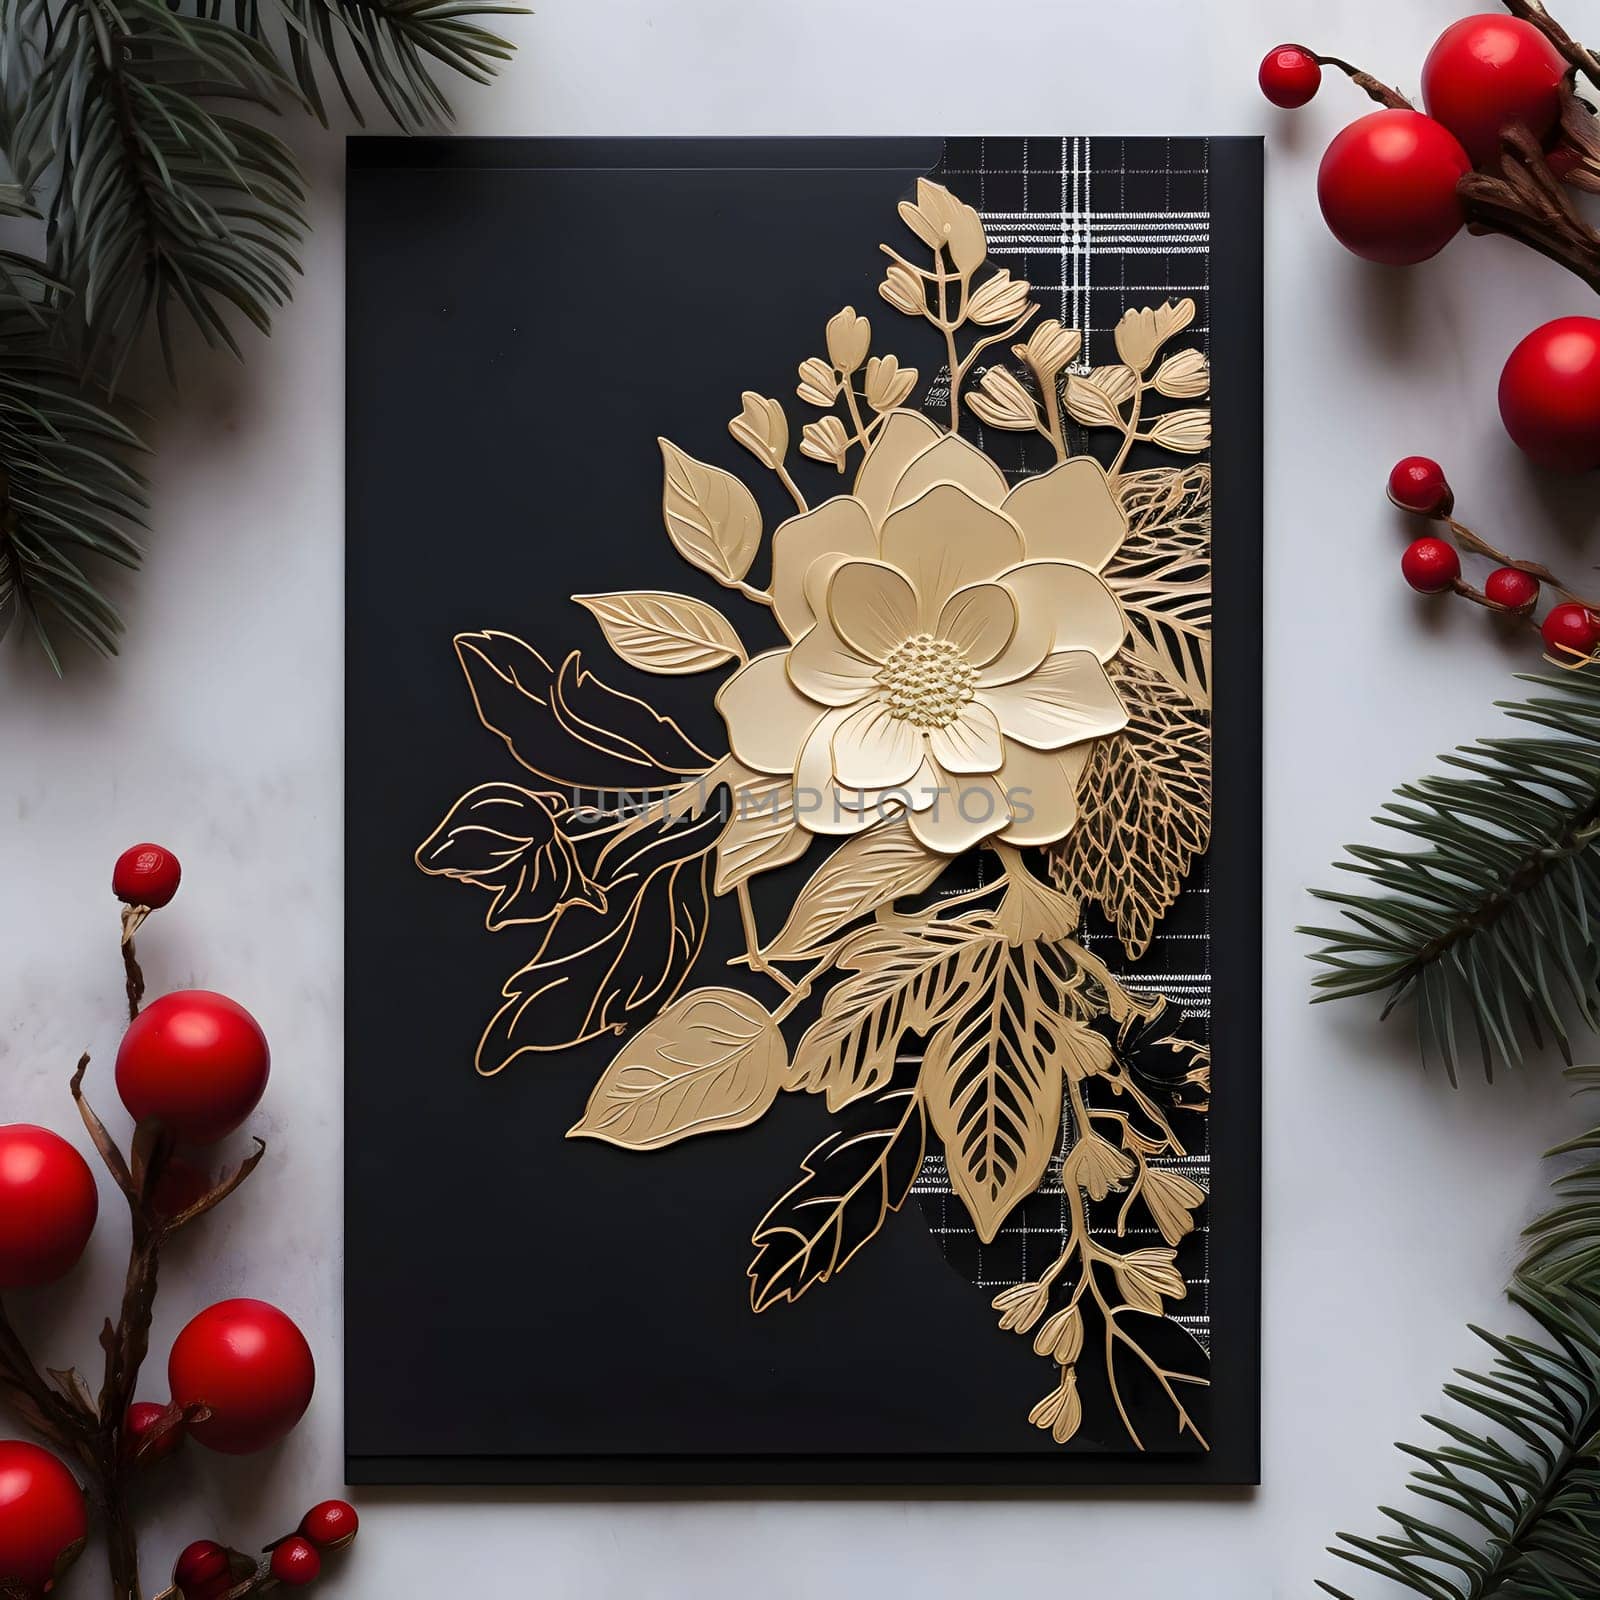 Dark card with handmade gold leaf flower and sprigs of conifers around red rowan ornament. Christmas card as a symbol of remembrance of the birth of the Savior. by ThemesS